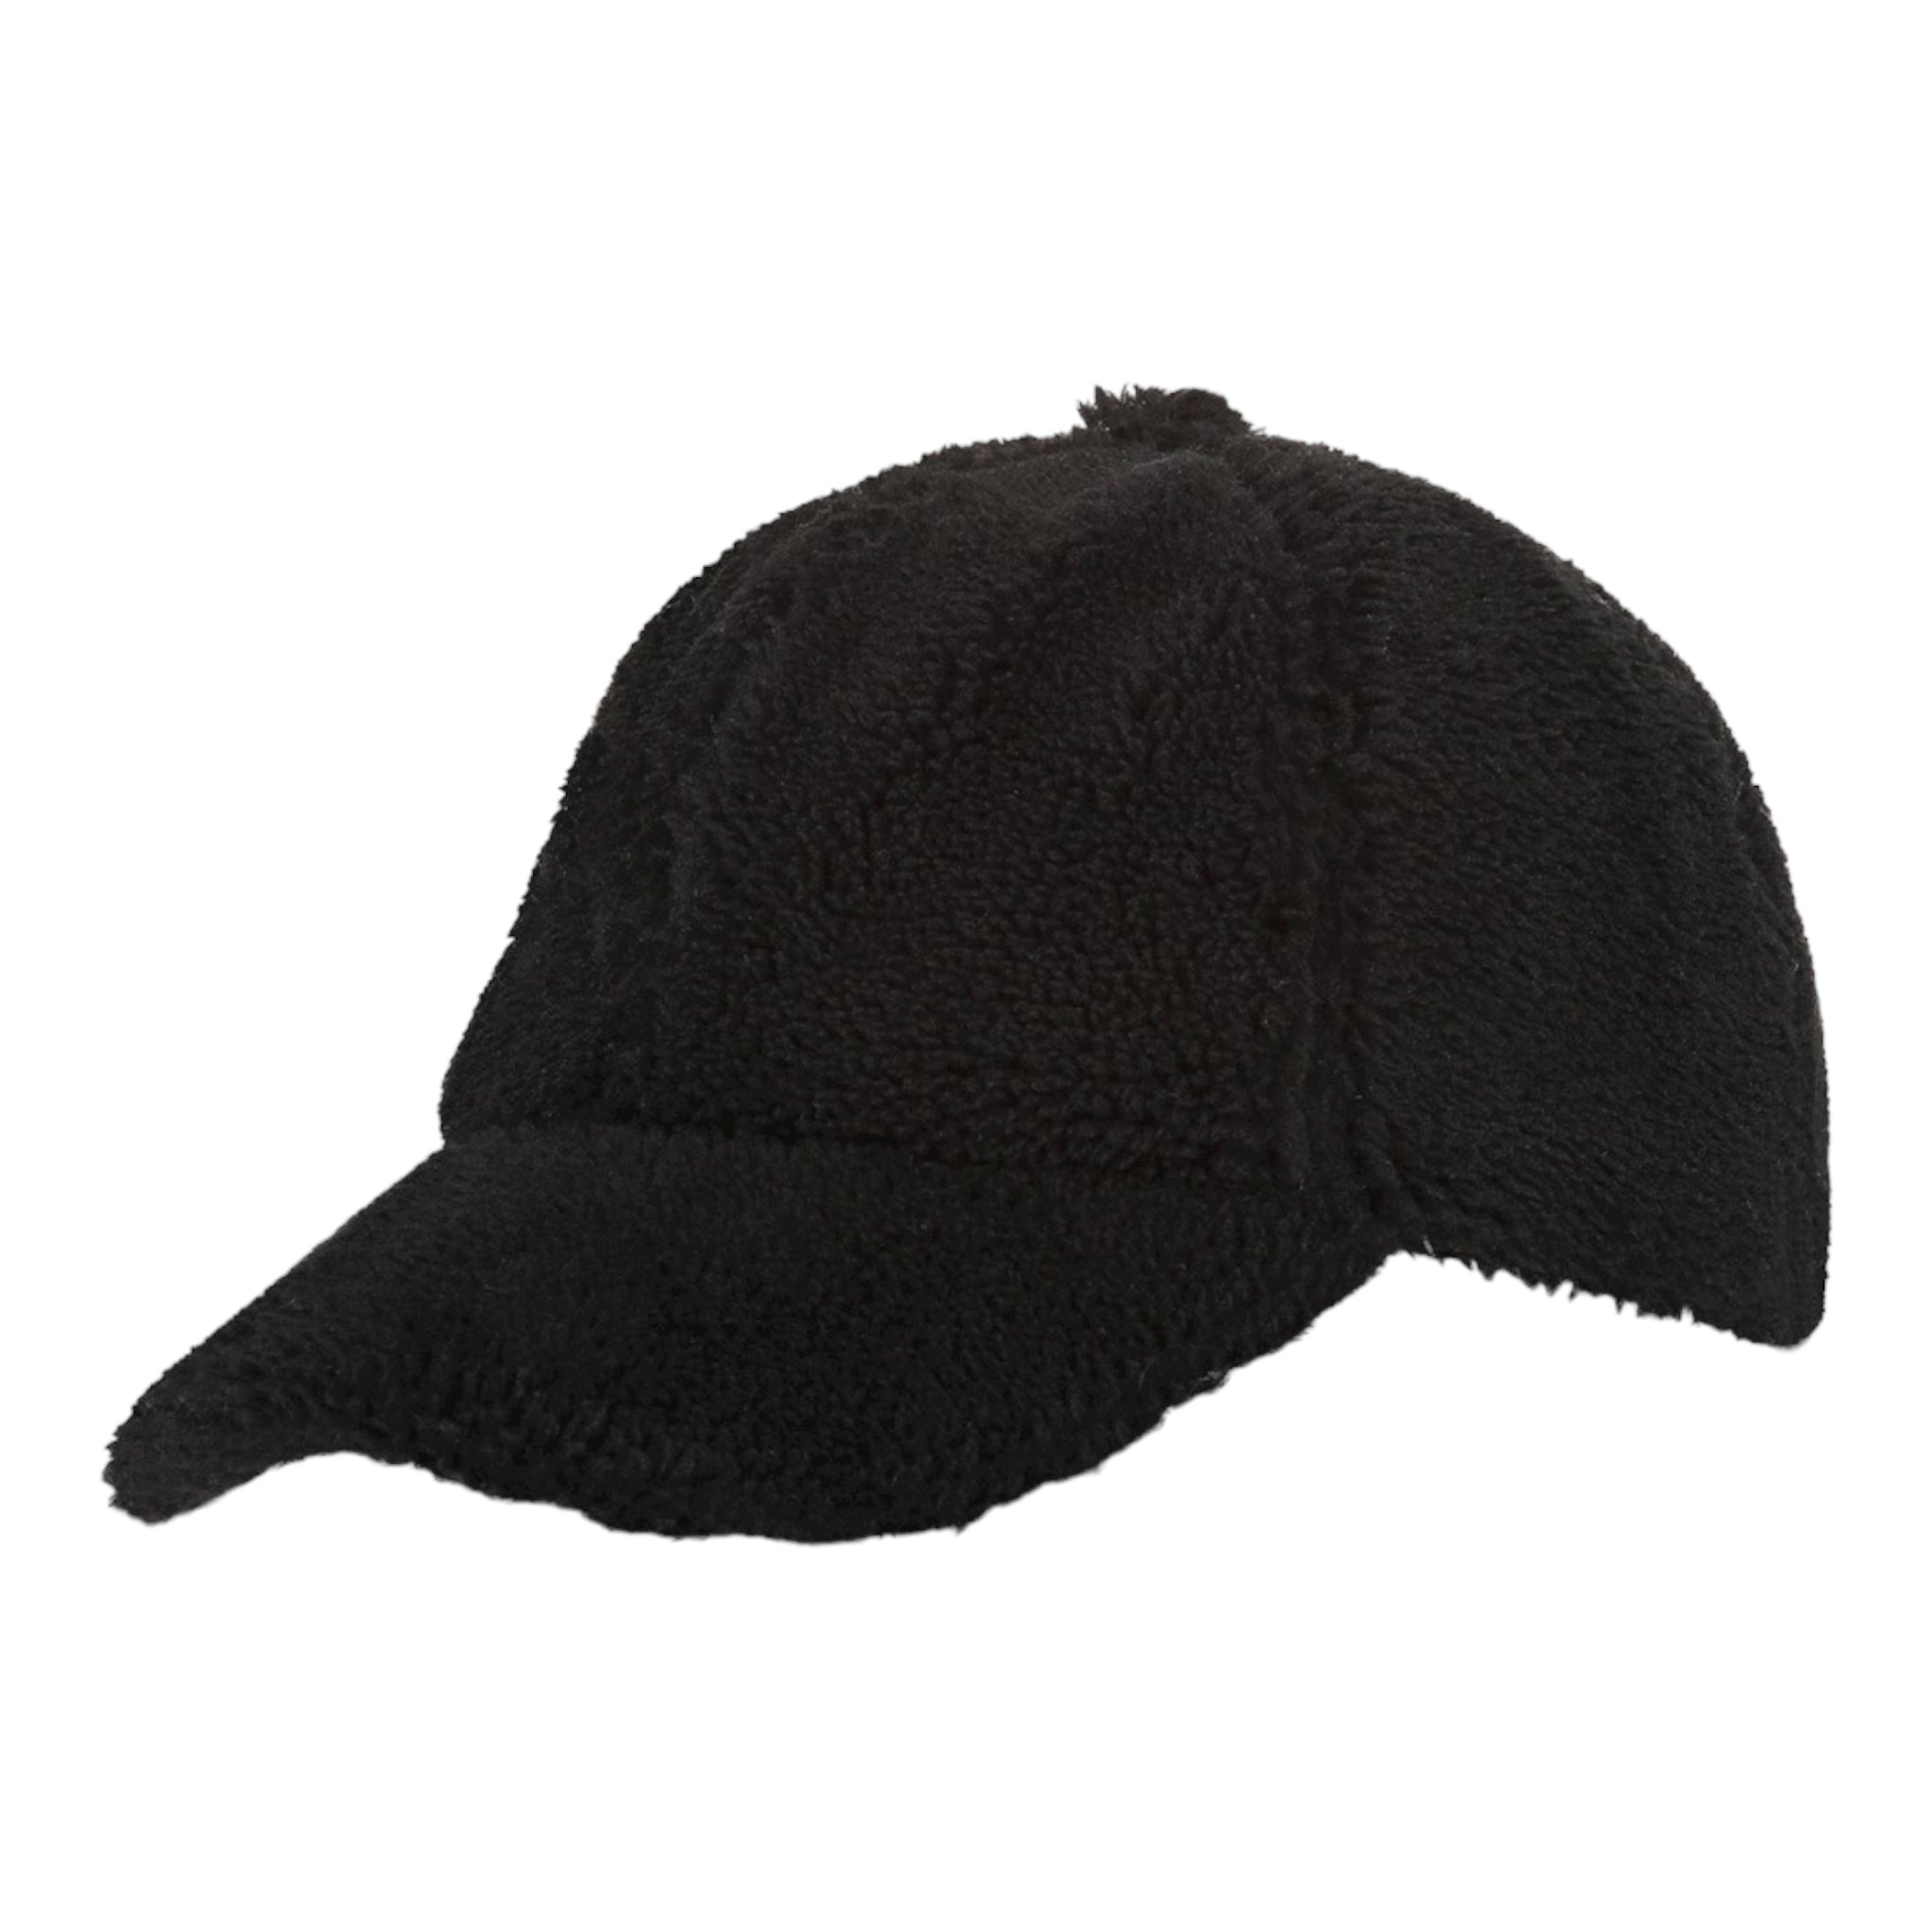 Rino-&-Pelle-Paddy-Cap-Black-Product-Image-Front-View